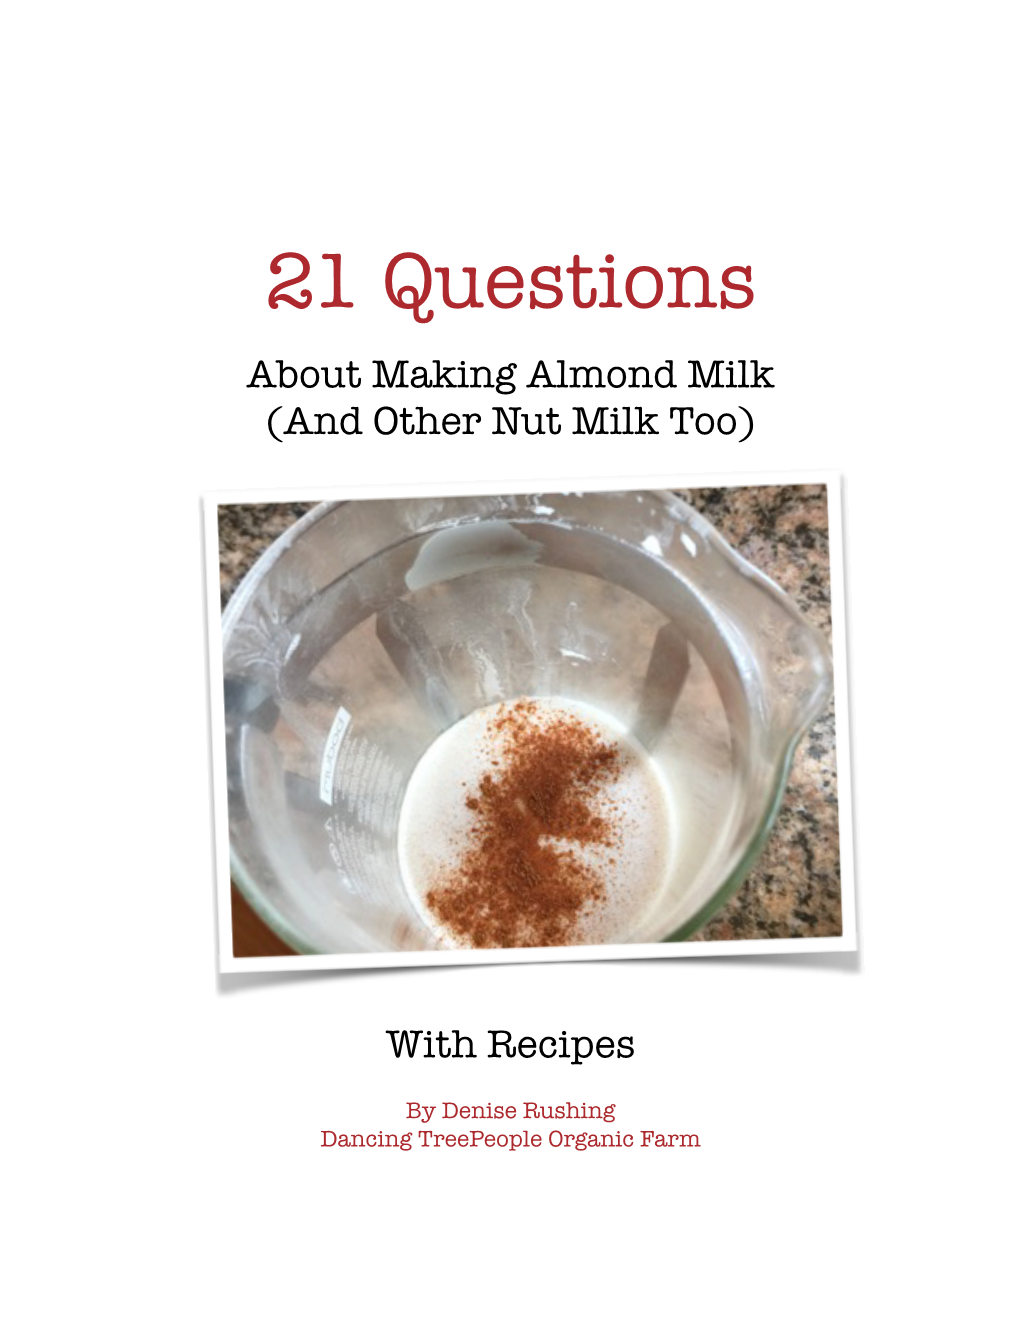 21 Questions About Making Nut Milk at Home